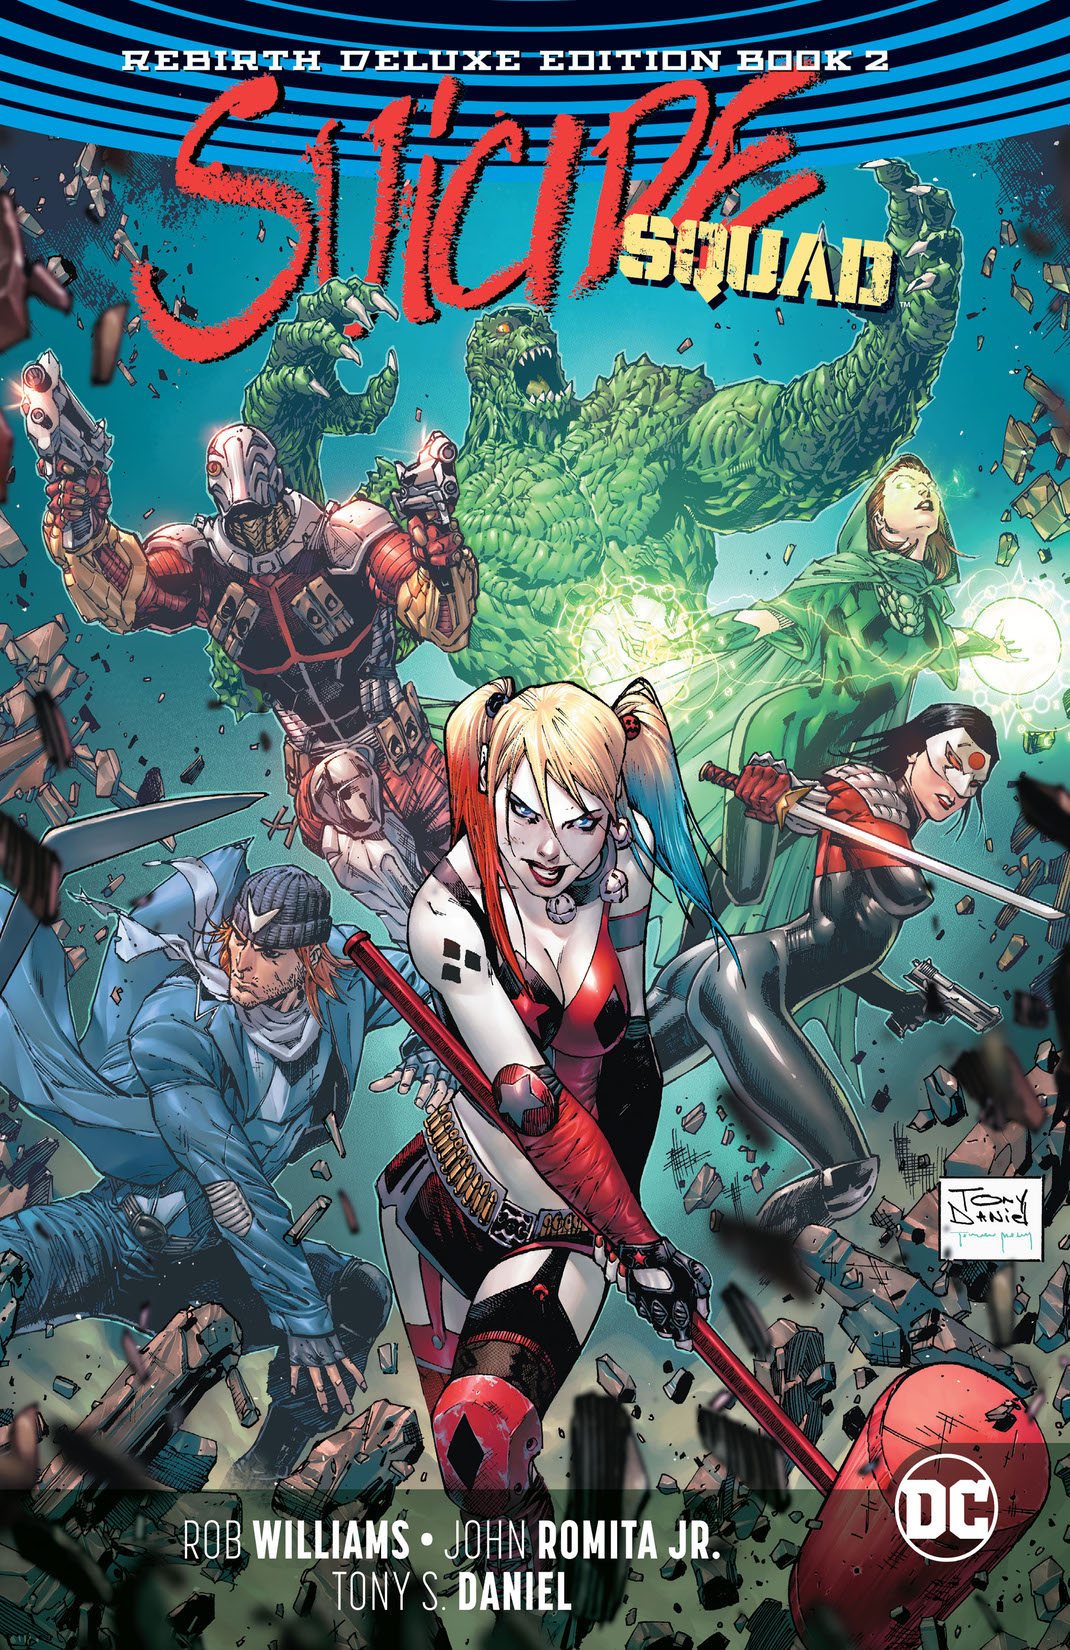 Suicide Squad: The Rebirth Deluxe Edition Book 2 preview images